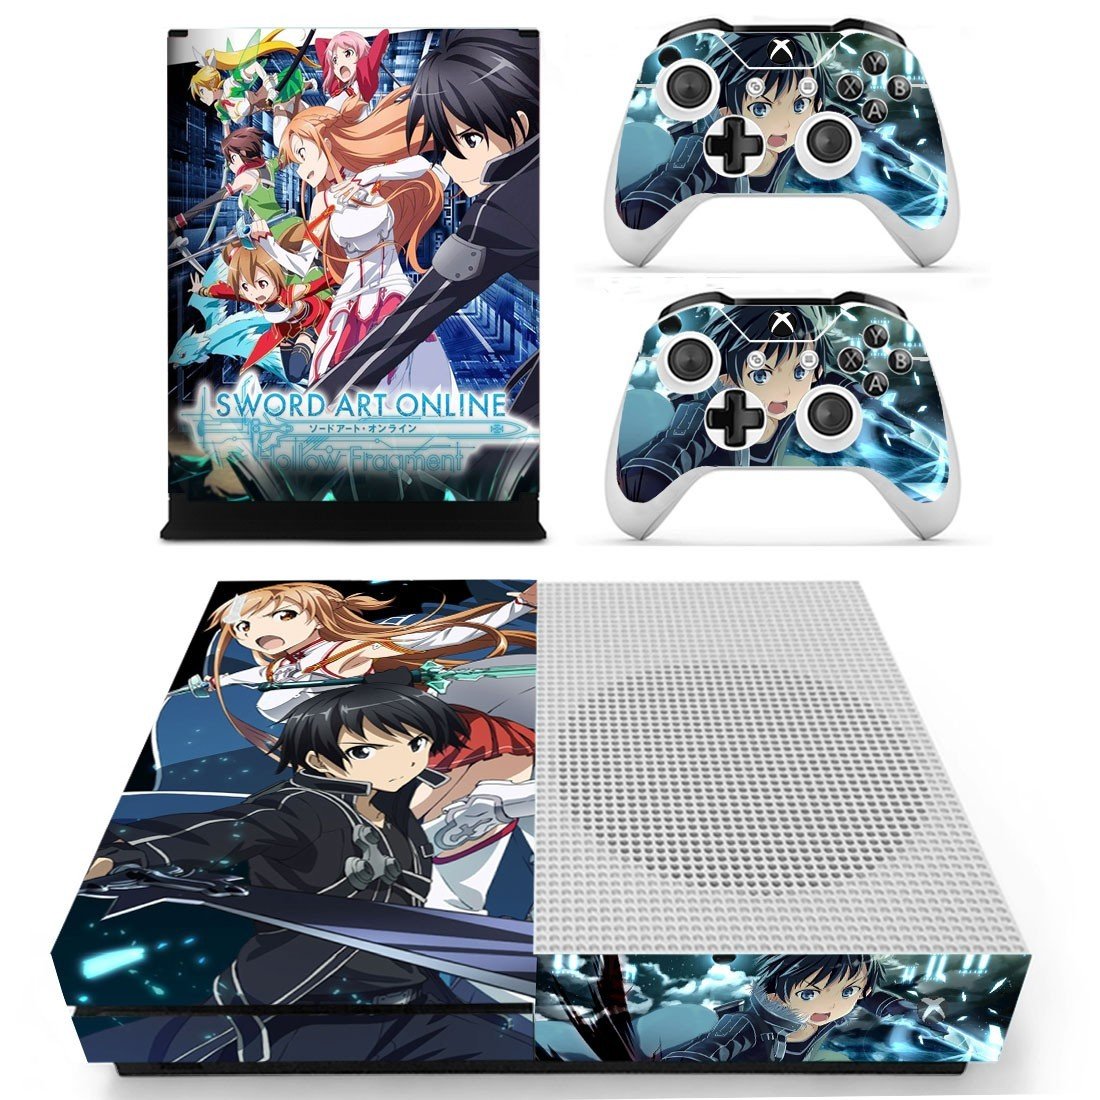 Xbox One S Skin Cover - Sword Art Online